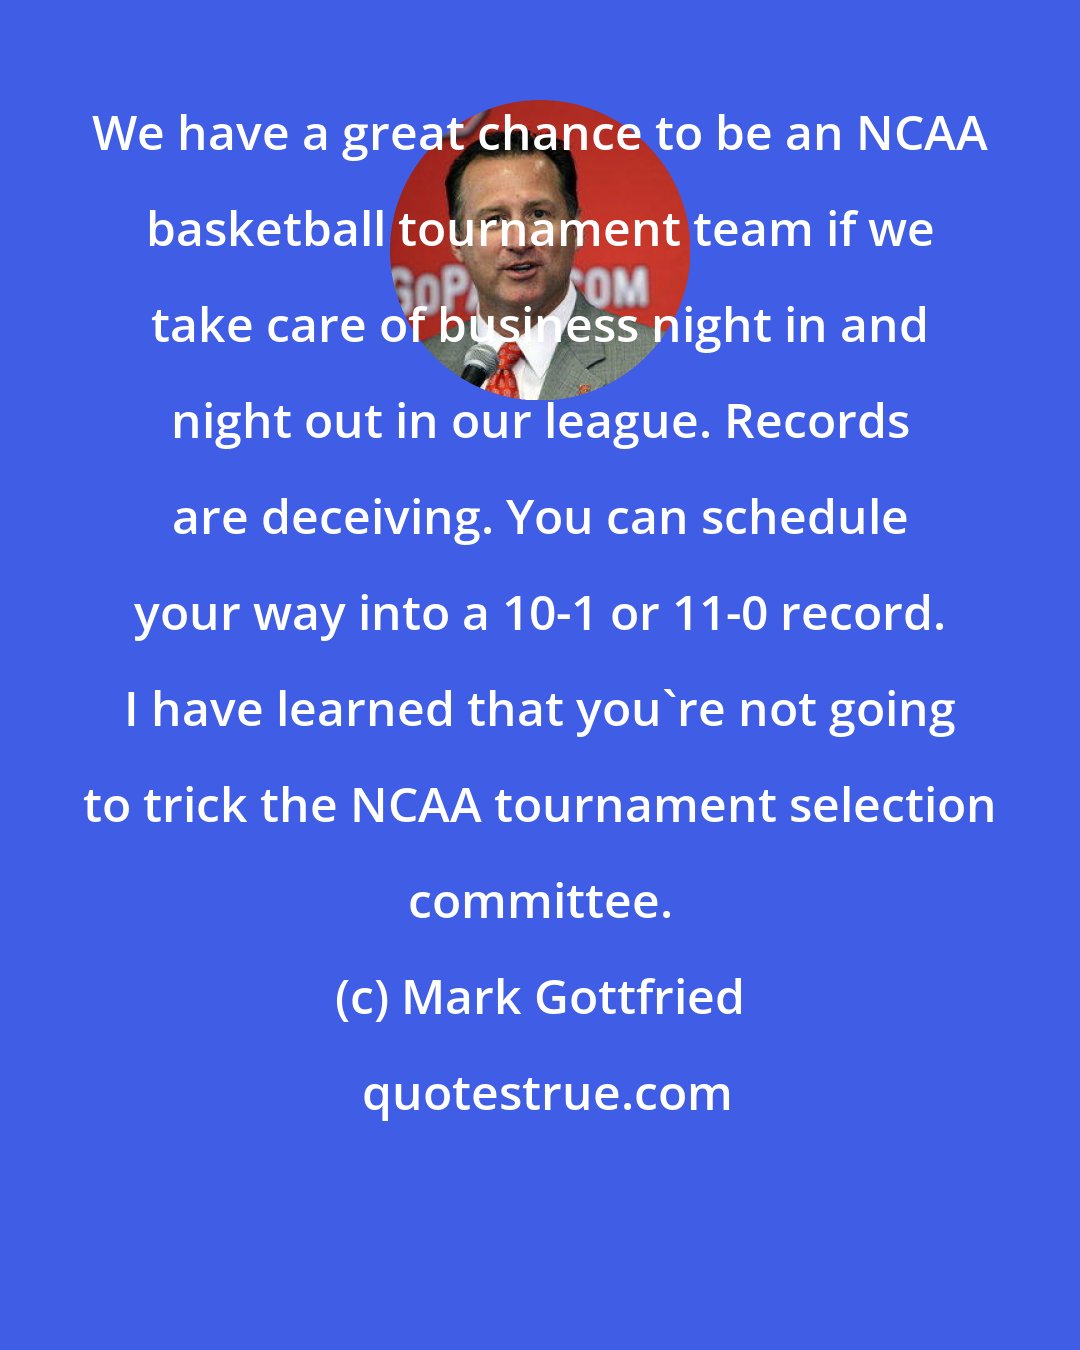 Mark Gottfried: We have a great chance to be an NCAA basketball tournament team if we take care of business night in and night out in our league. Records are deceiving. You can schedule your way into a 10-1 or 11-0 record. I have learned that you're not going to trick the NCAA tournament selection committee.